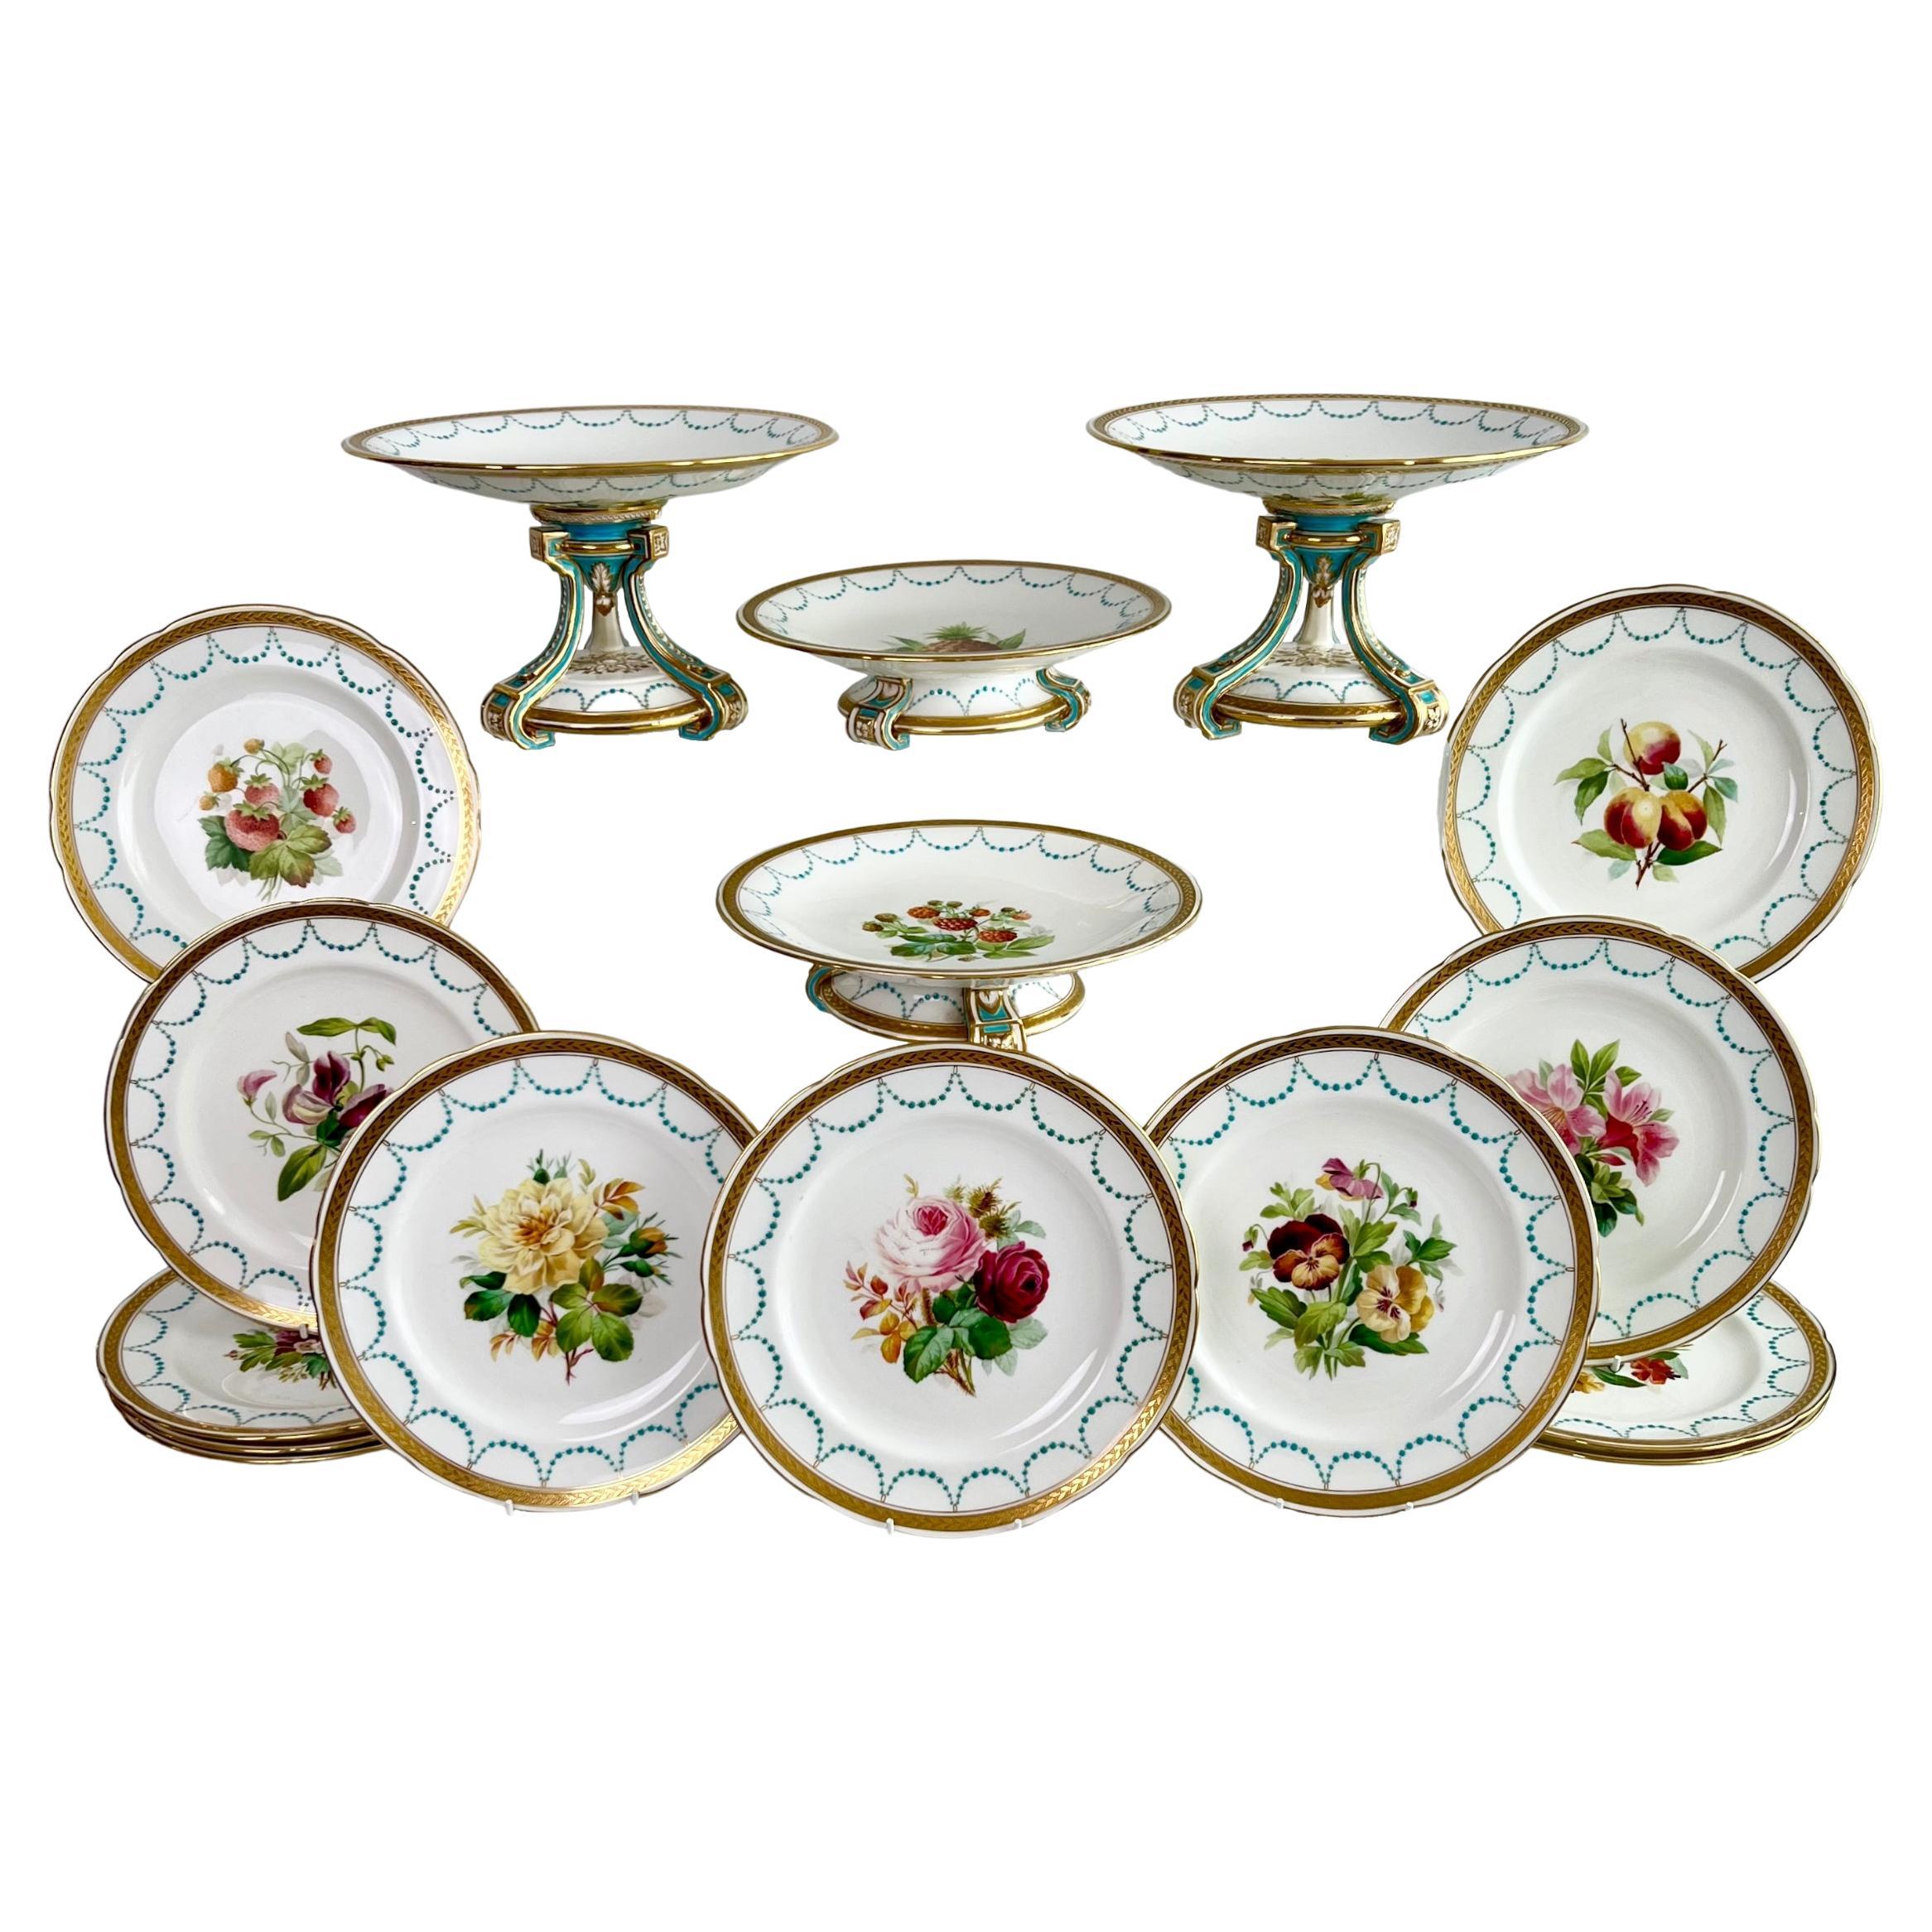 Minton Porcelain Dessert Service, Turquoise and Gilt, Flowers and Fruits, 1870